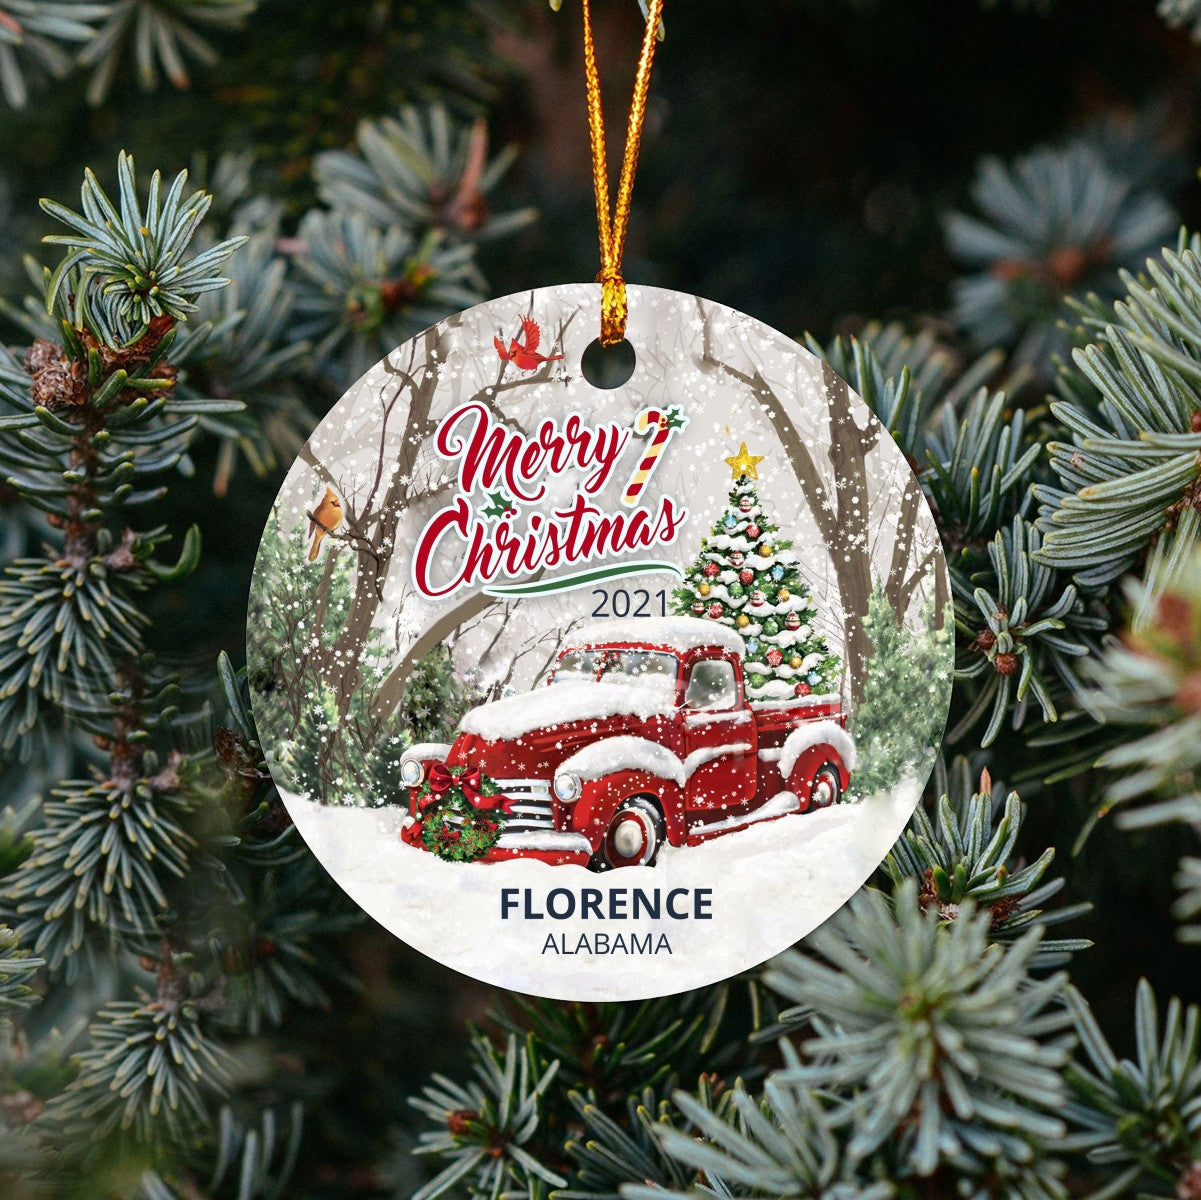 Christmas Tree Ornaments Florence - Ornament Customize With Name City And State Florence Alabama AL - Red Truck Xmas Ornaments 3'' Plastic Gift For Family, Friend And Housewarming